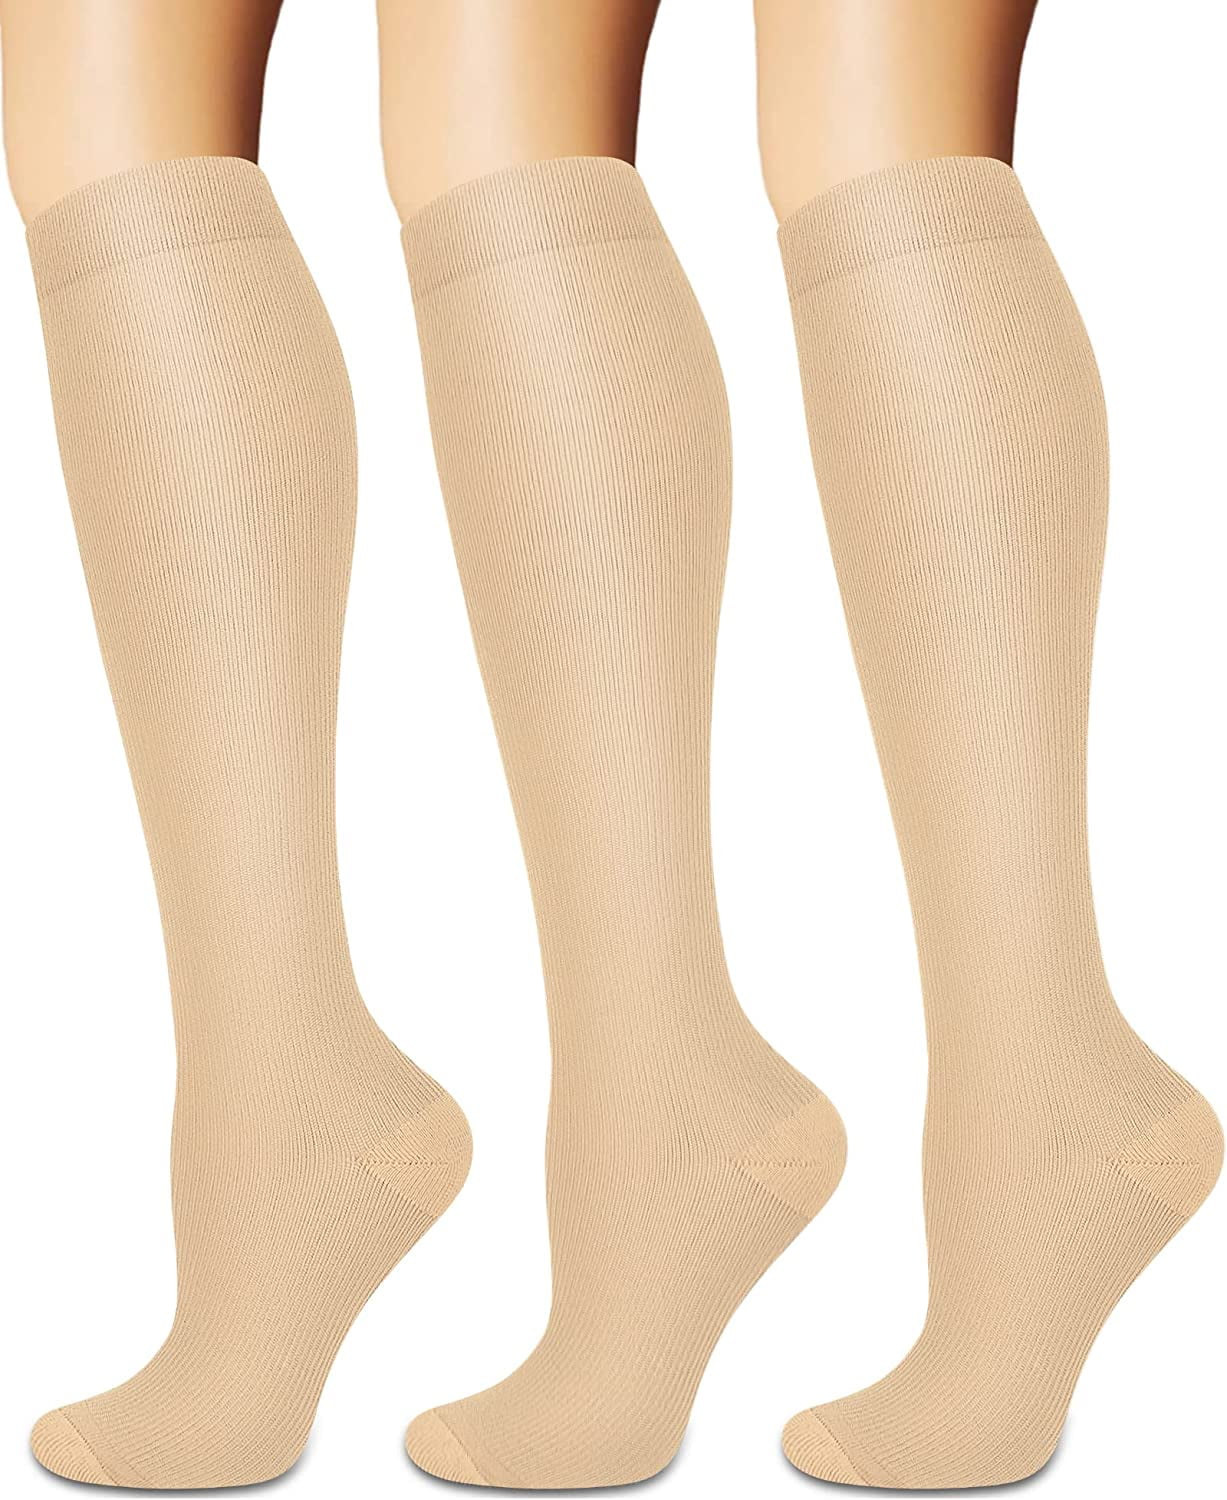 Compression Socks for Women and Men Circulation (3 Pairs) - Best for ...